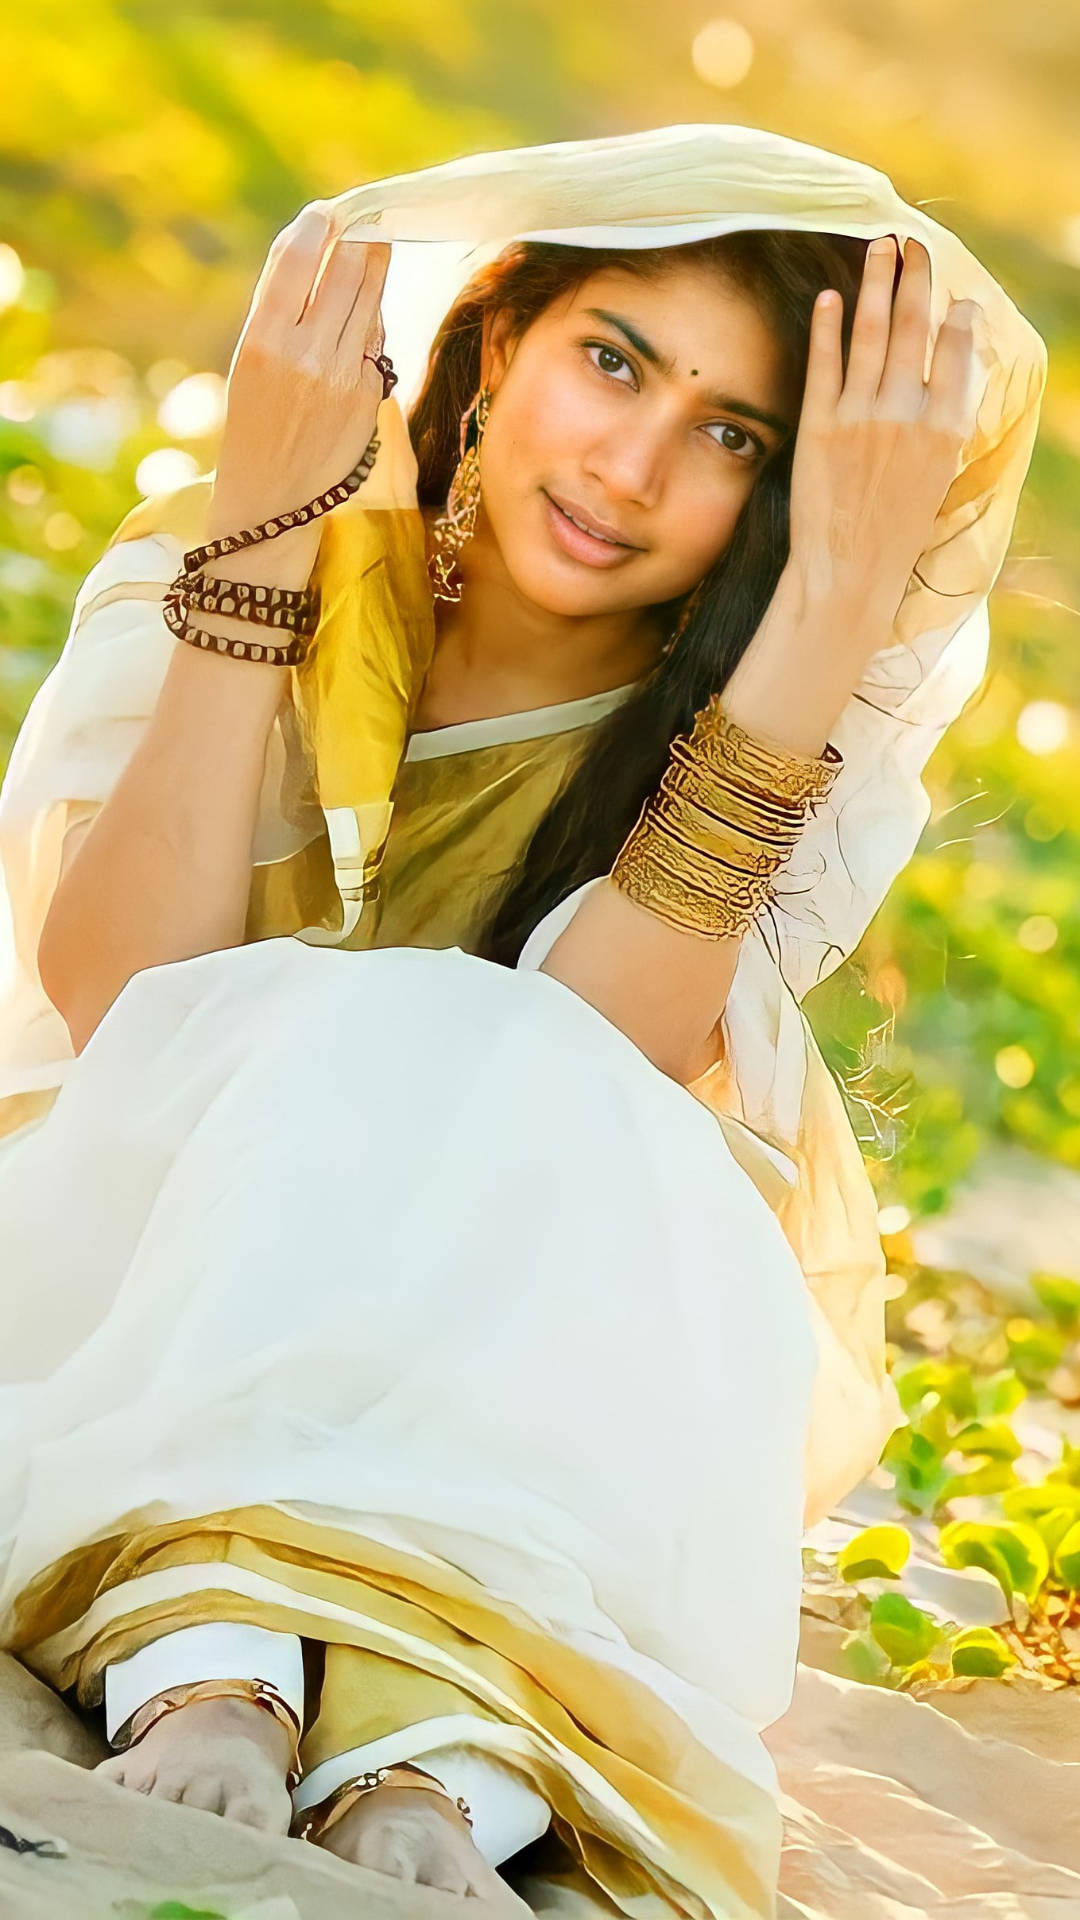 Sai Pallavi Exuding Elegance In A White Outfit. Background